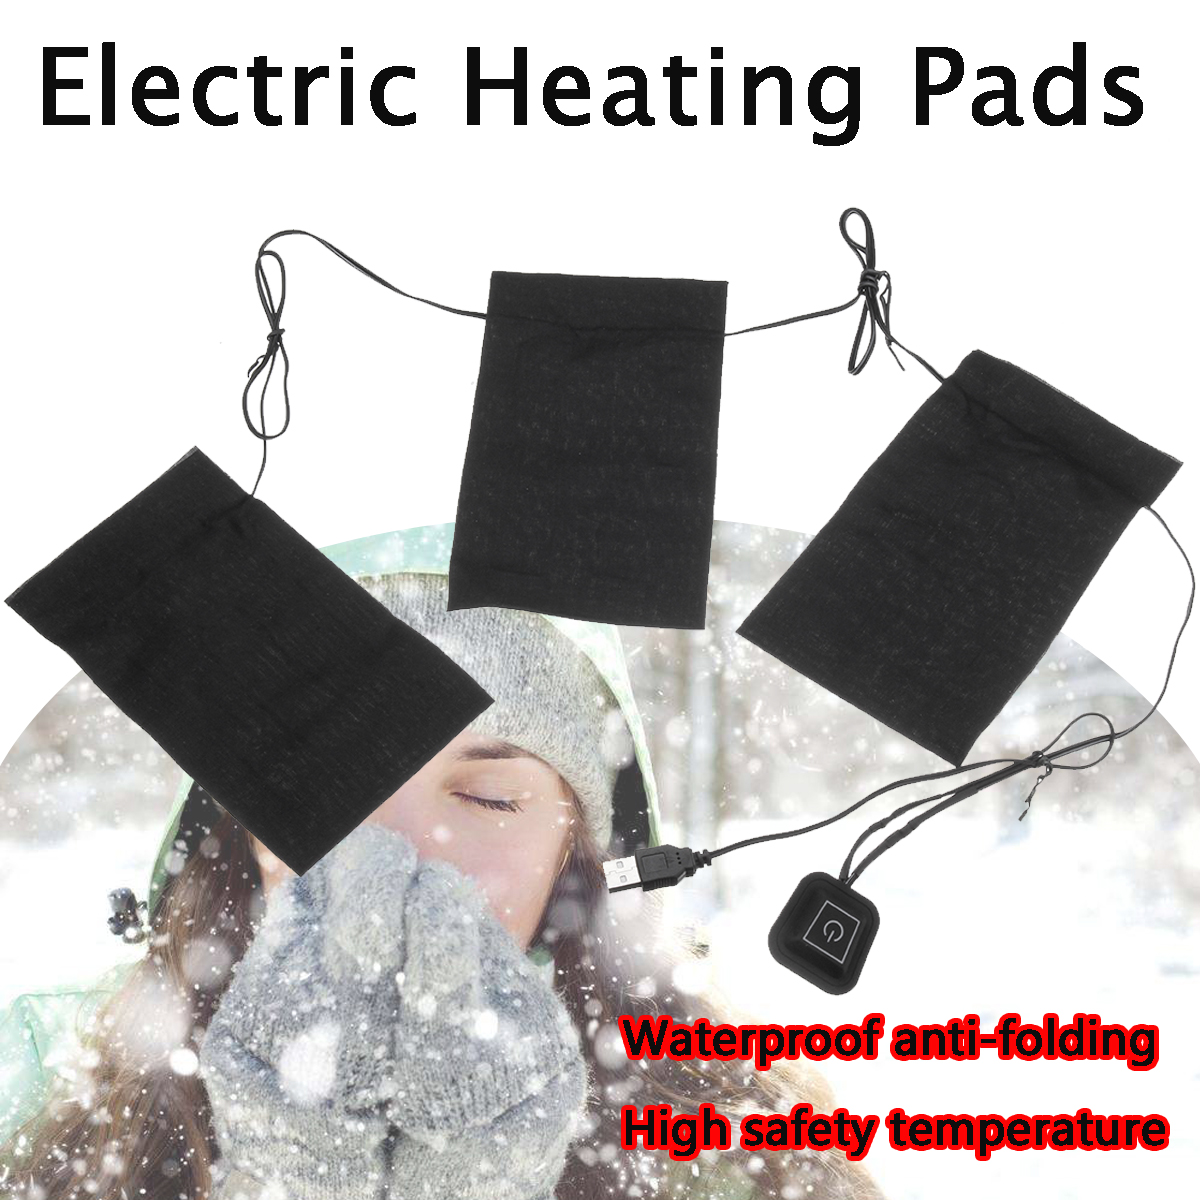 5V-2A-85W-Electric-Heating-Pads-3Pads-Waterproof-Heating-Cloth-Pads-Set-1244905-1